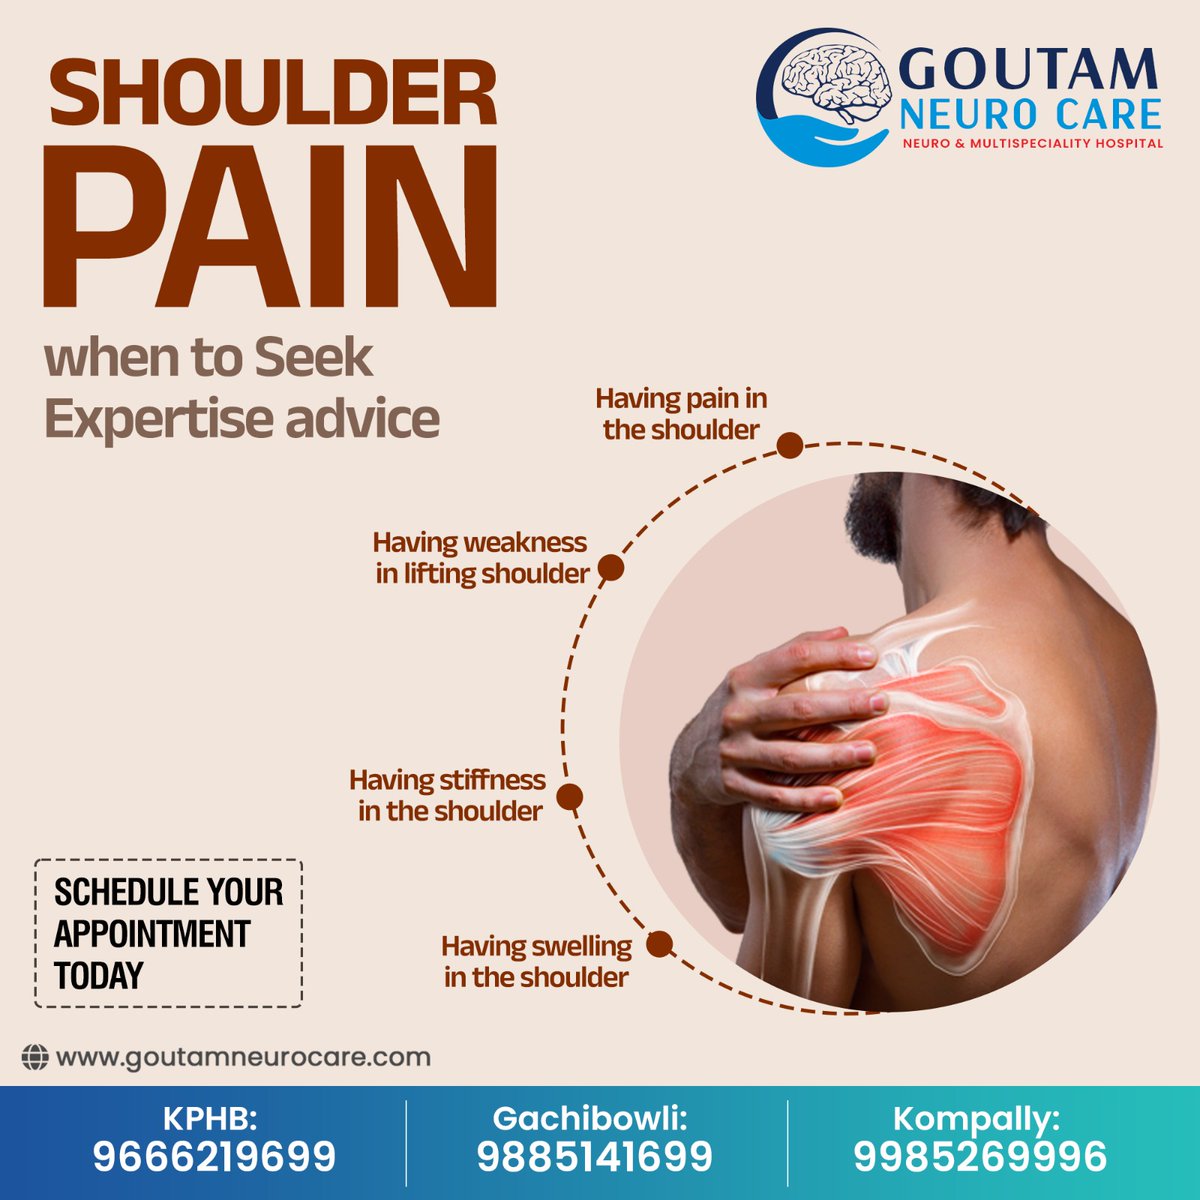 Experiencing persistent shoulder pain? It's time for an orthopedic consultation. Don't let discomfort hold you back any longer. Contact us today for expert care and relief.
#shoulderpain #Expert #advice #shoulderswelling #shoulderstiffness #painreleif #Goutamneurocare